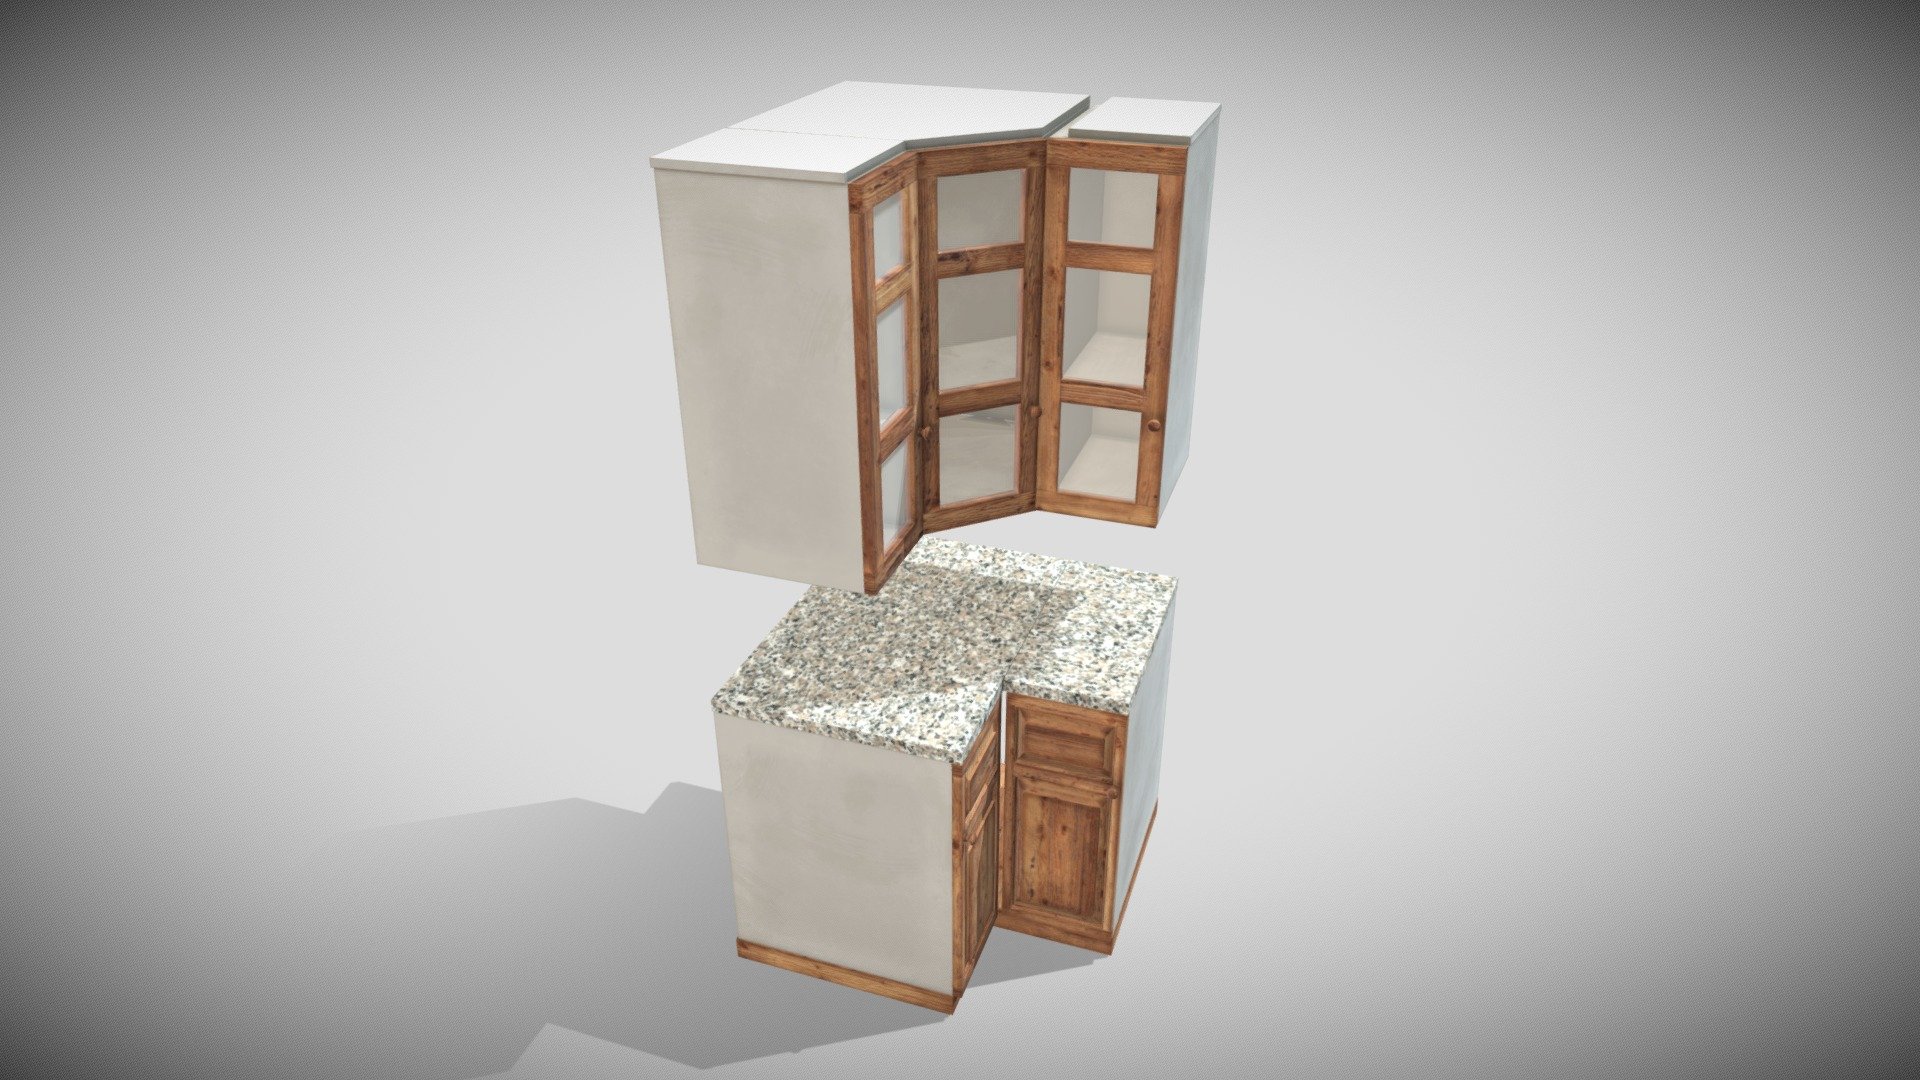 One Material PBR 4k Metalness

Pivot at Zero Bottom

Size OK

Door are separate objects with Pivot in right place and can be animated

Complete Compilatio https://skfb.ly/ovXFn - Kitchen Modules - Mod X - Buy Royalty Free 3D model by Francesco Coldesina (@topfrank2013) 3d model